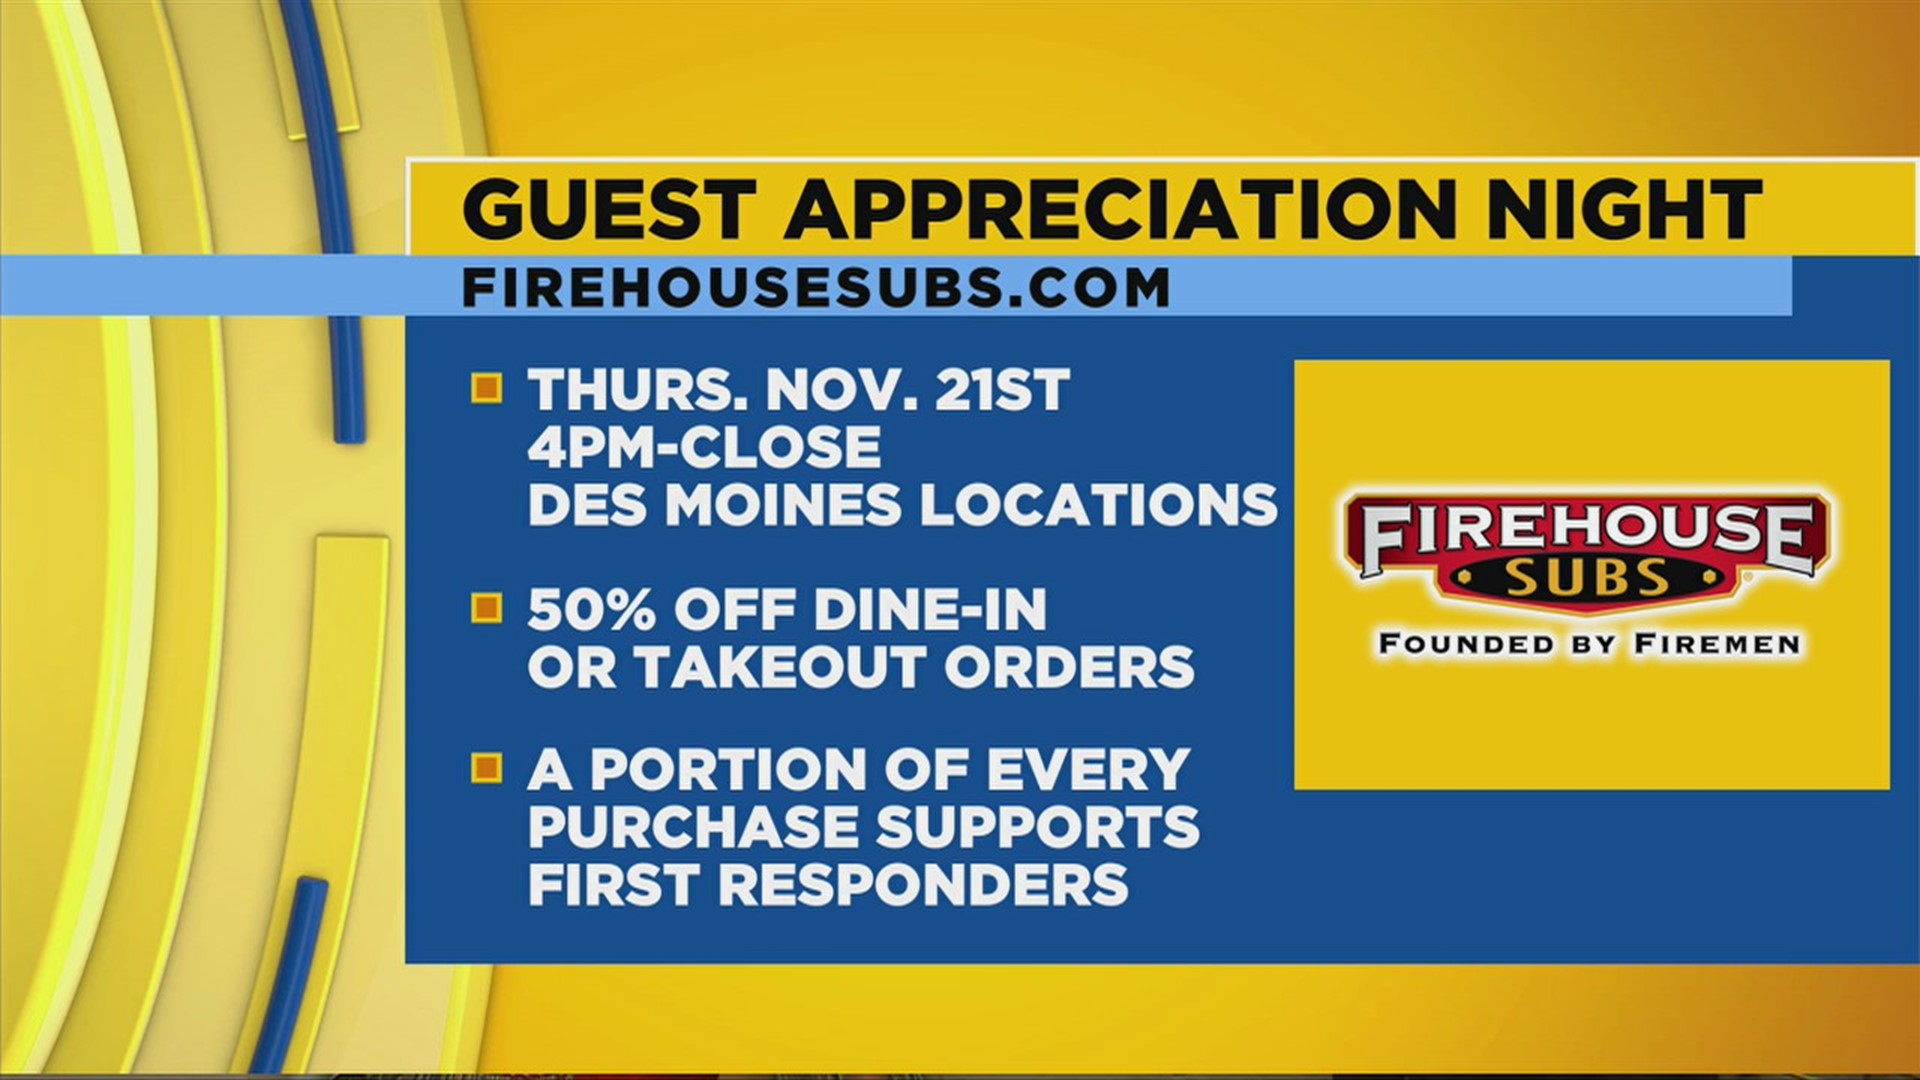 Firehouse Subs Guest Appreciation Night